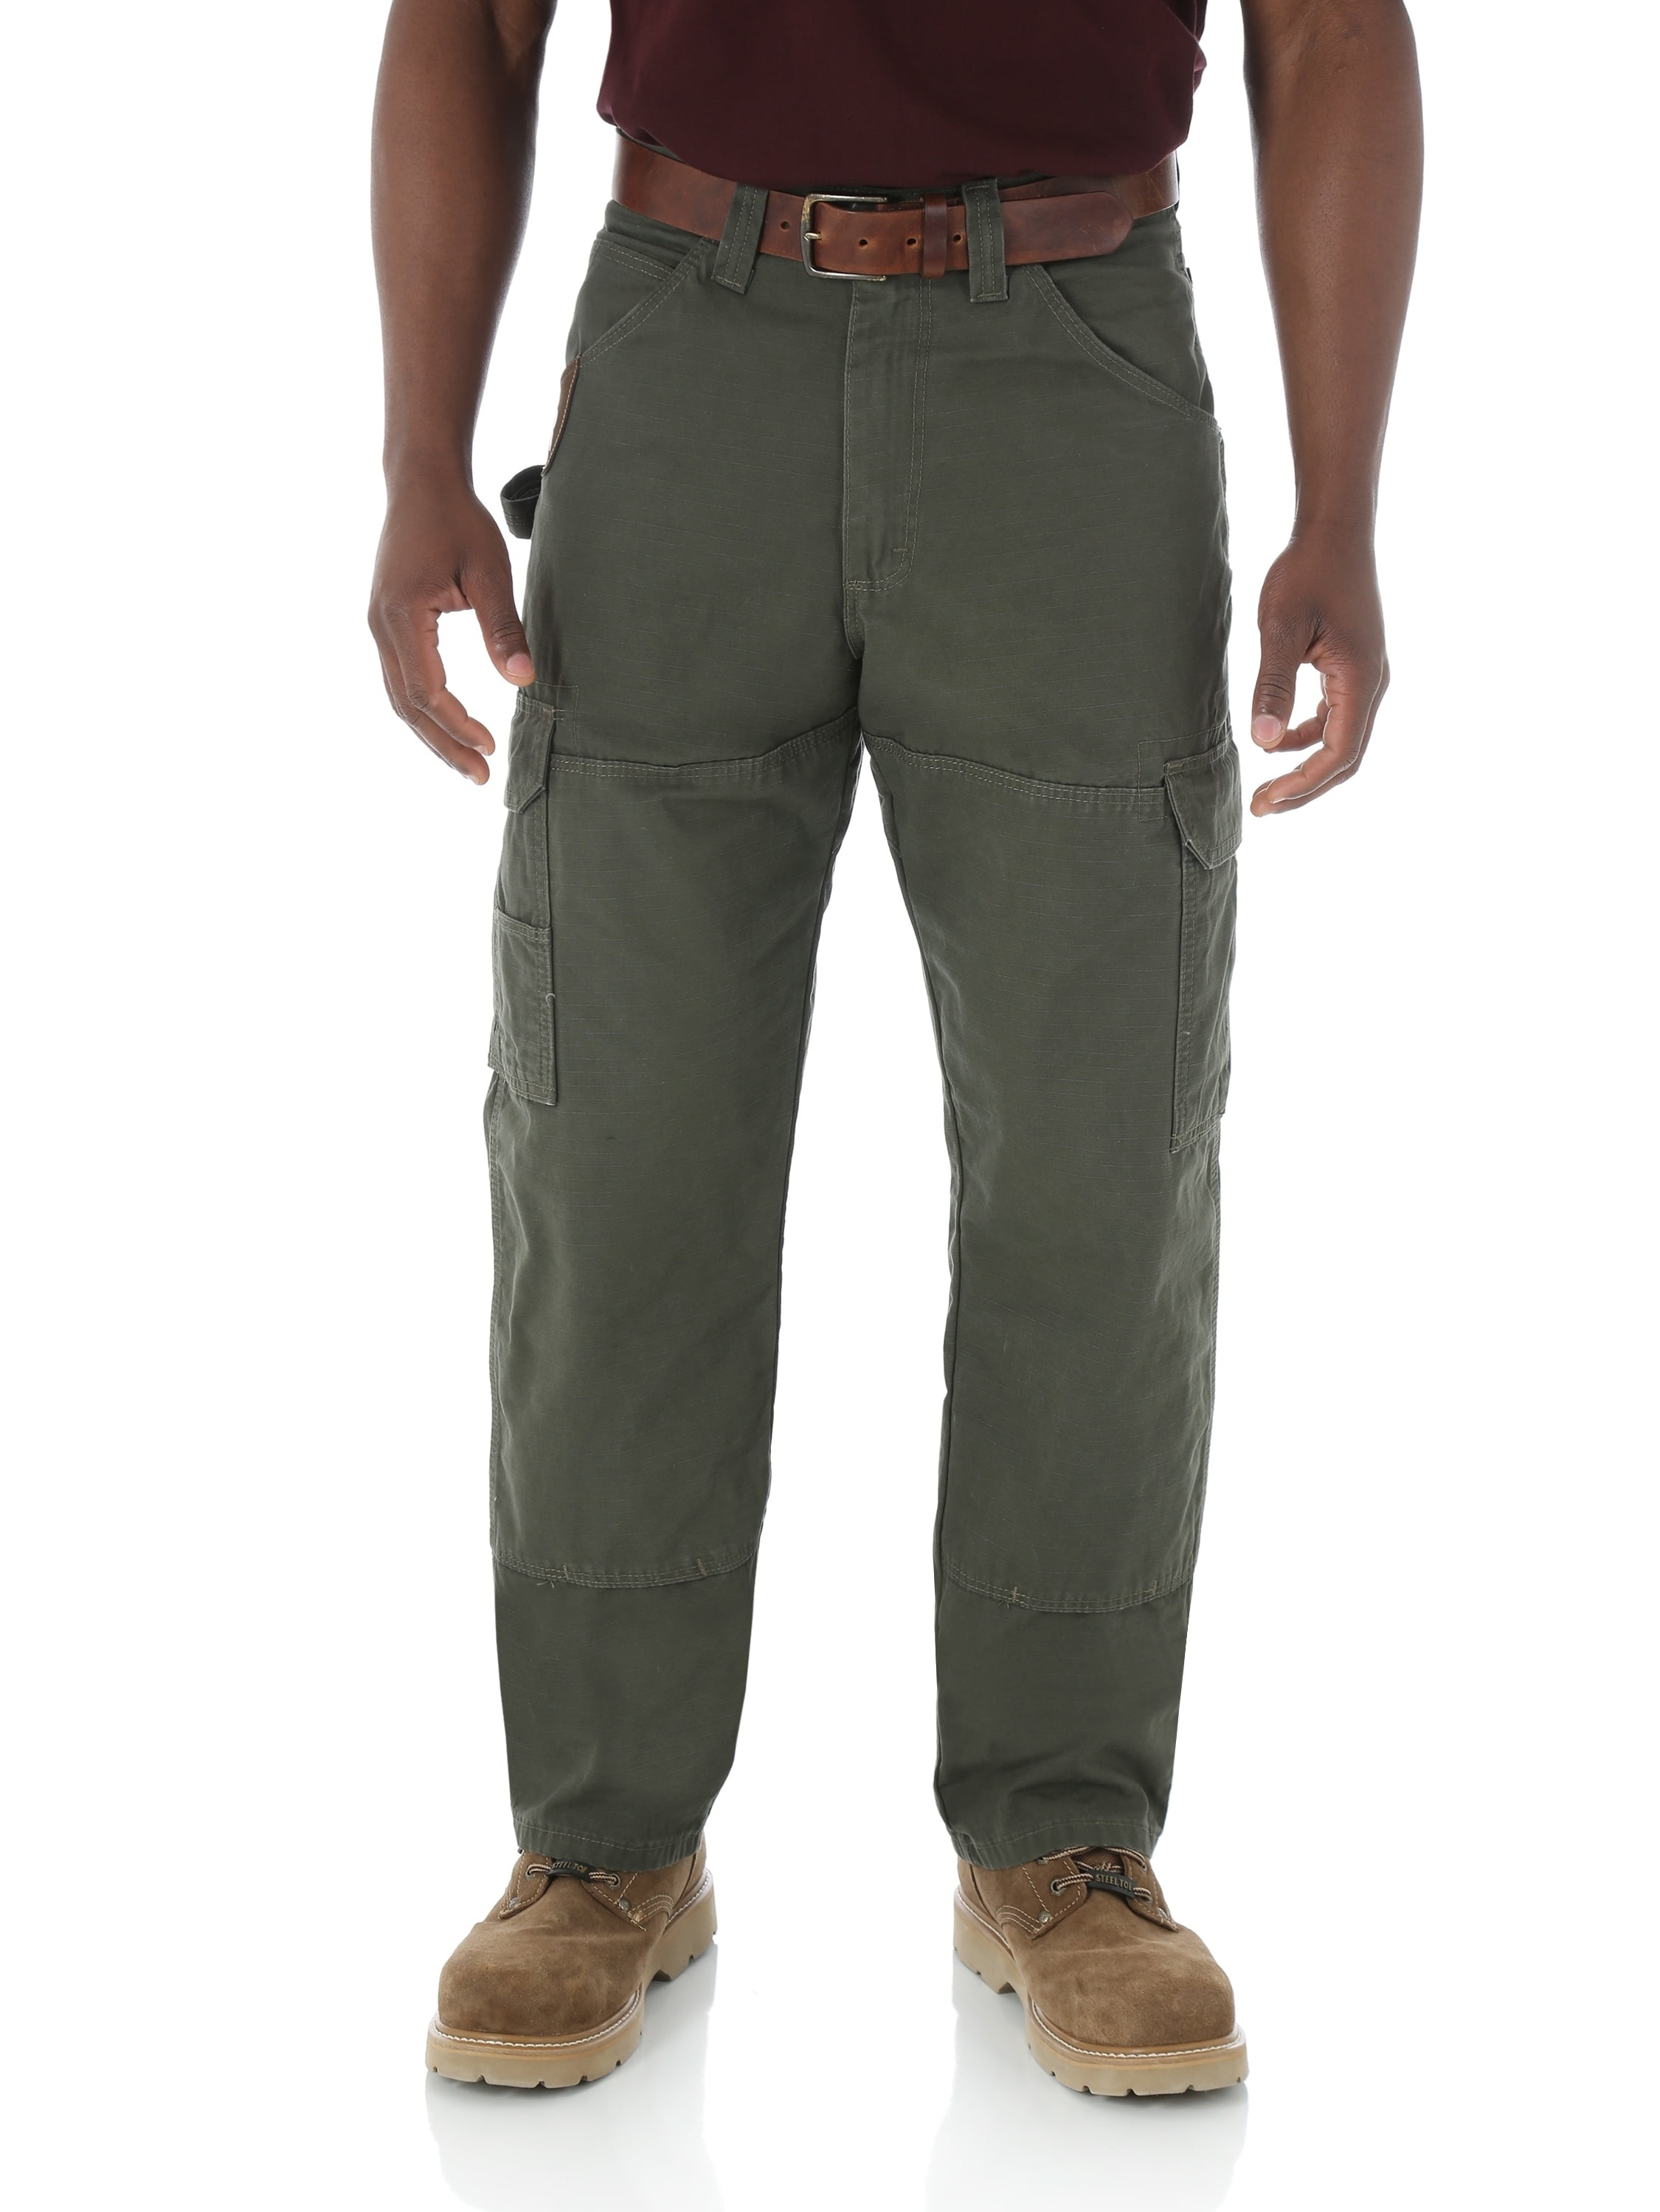 Details about   Mens Combat Cargo Work Trousers Heavy Duty Multi Pocket Pants with Knee Pads 